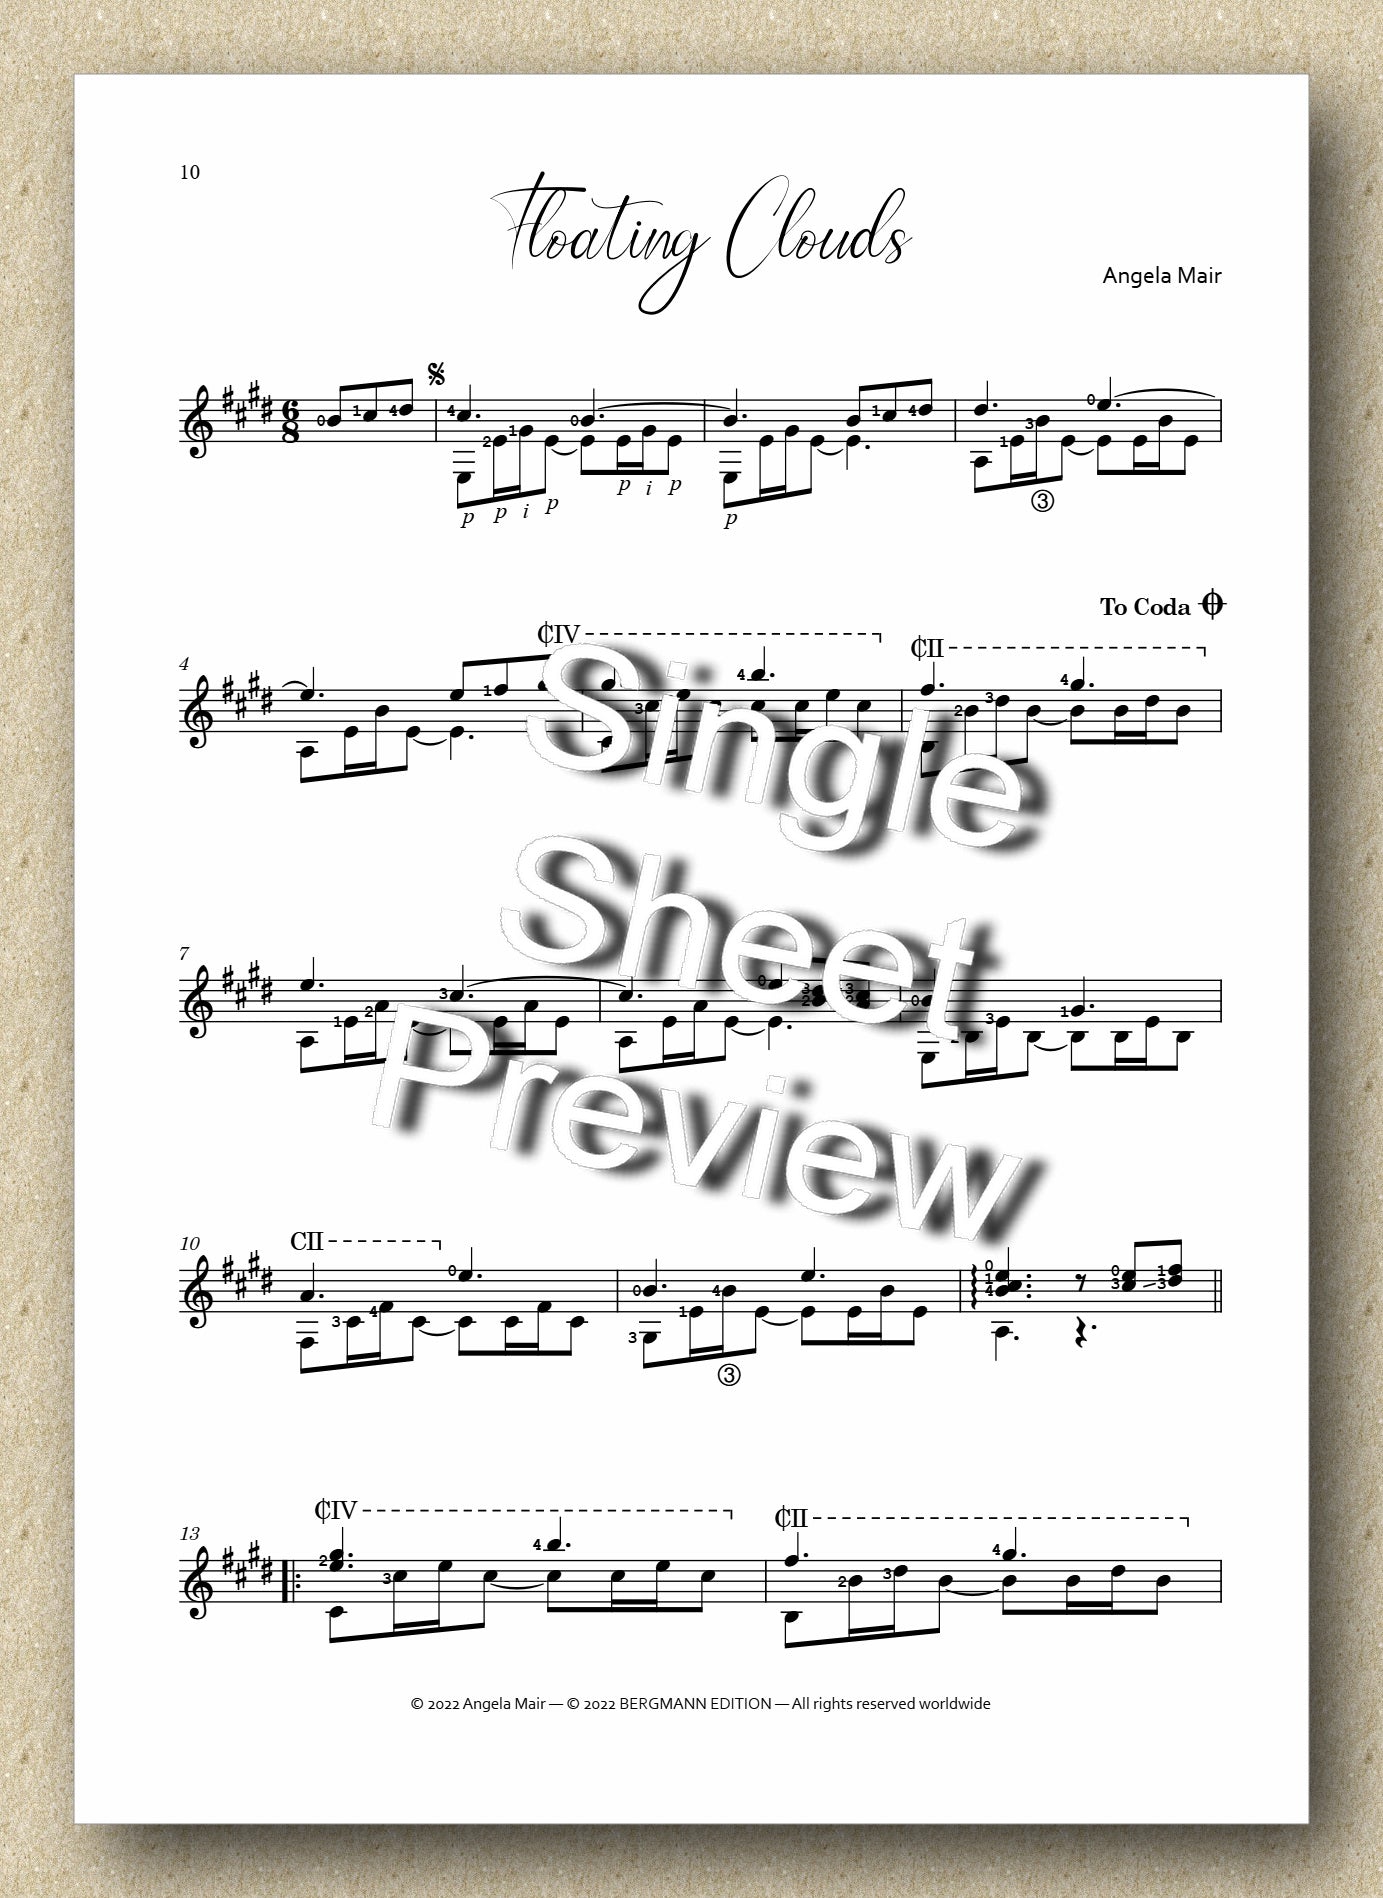 One by One - vol. 4, by Angela Mair - preview of the music score 2